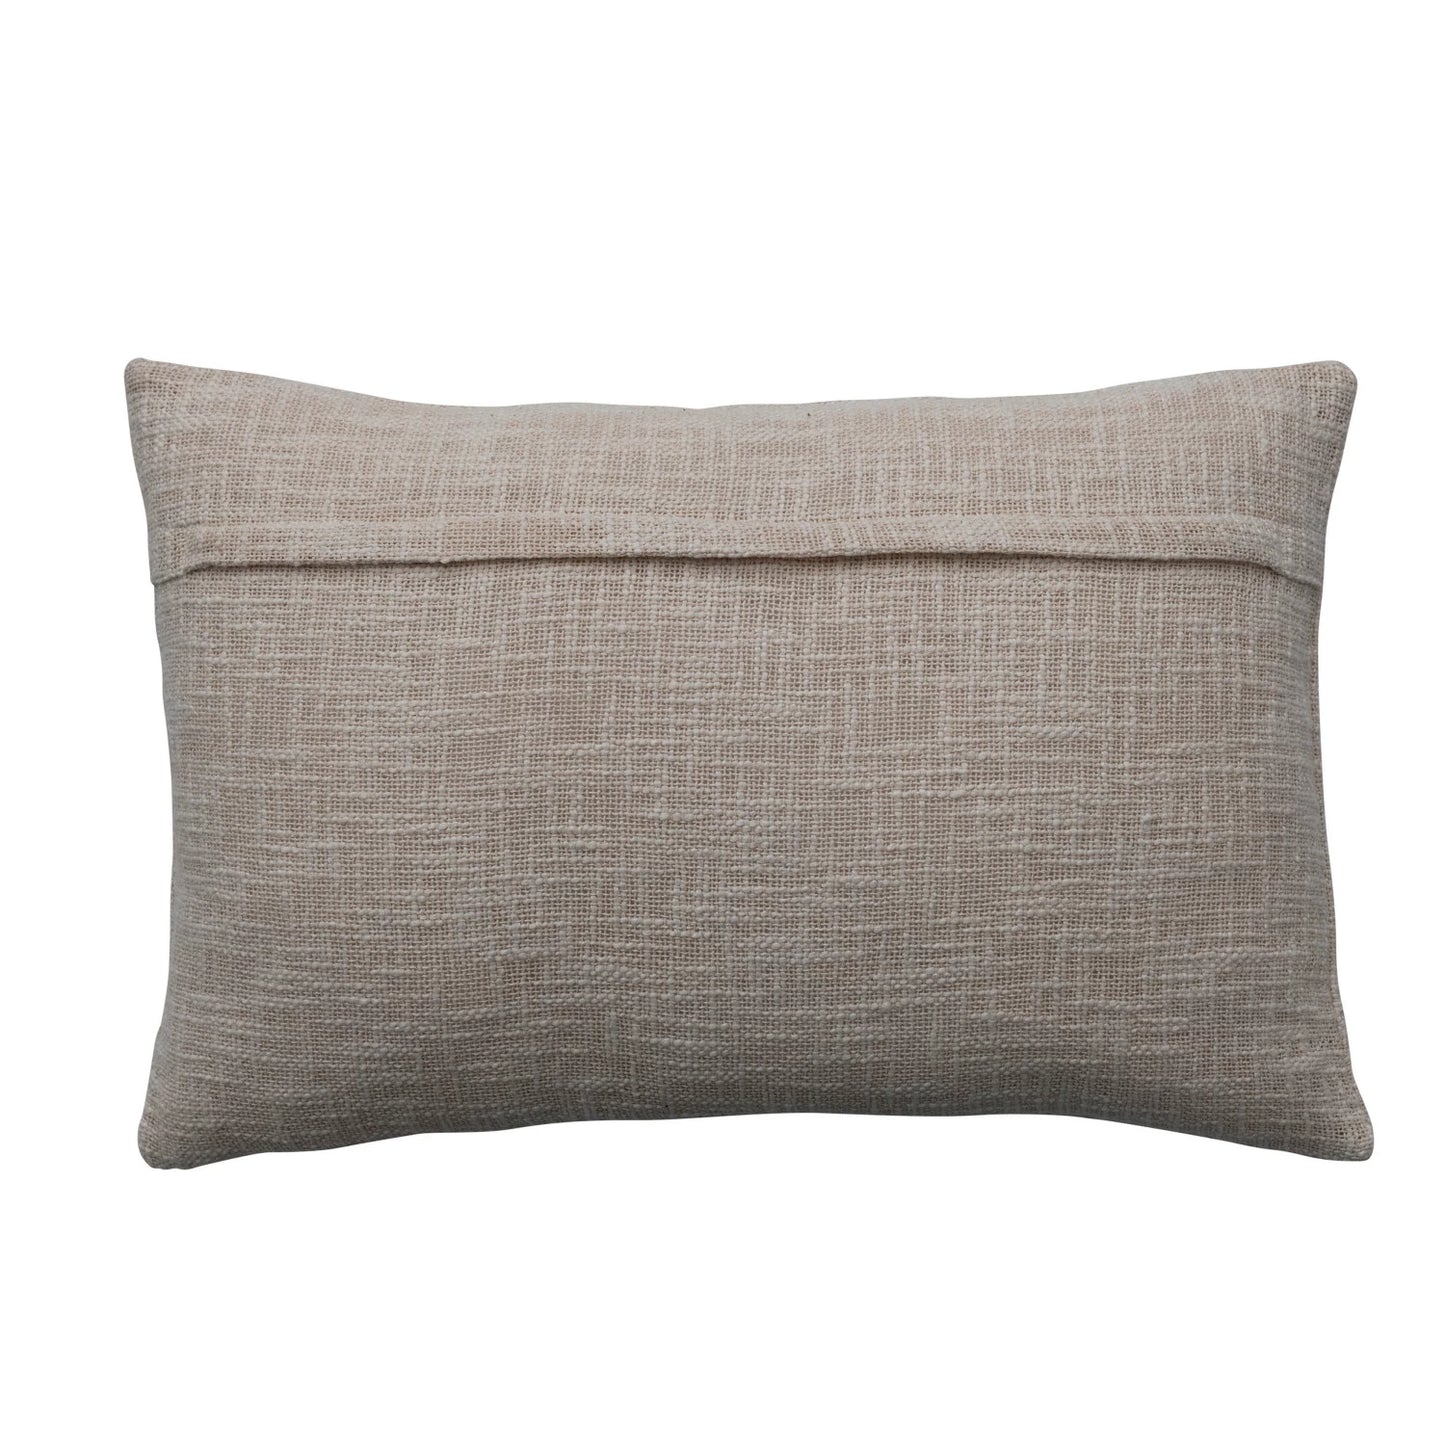 solid natural cotton back of pillow with zipper closure.